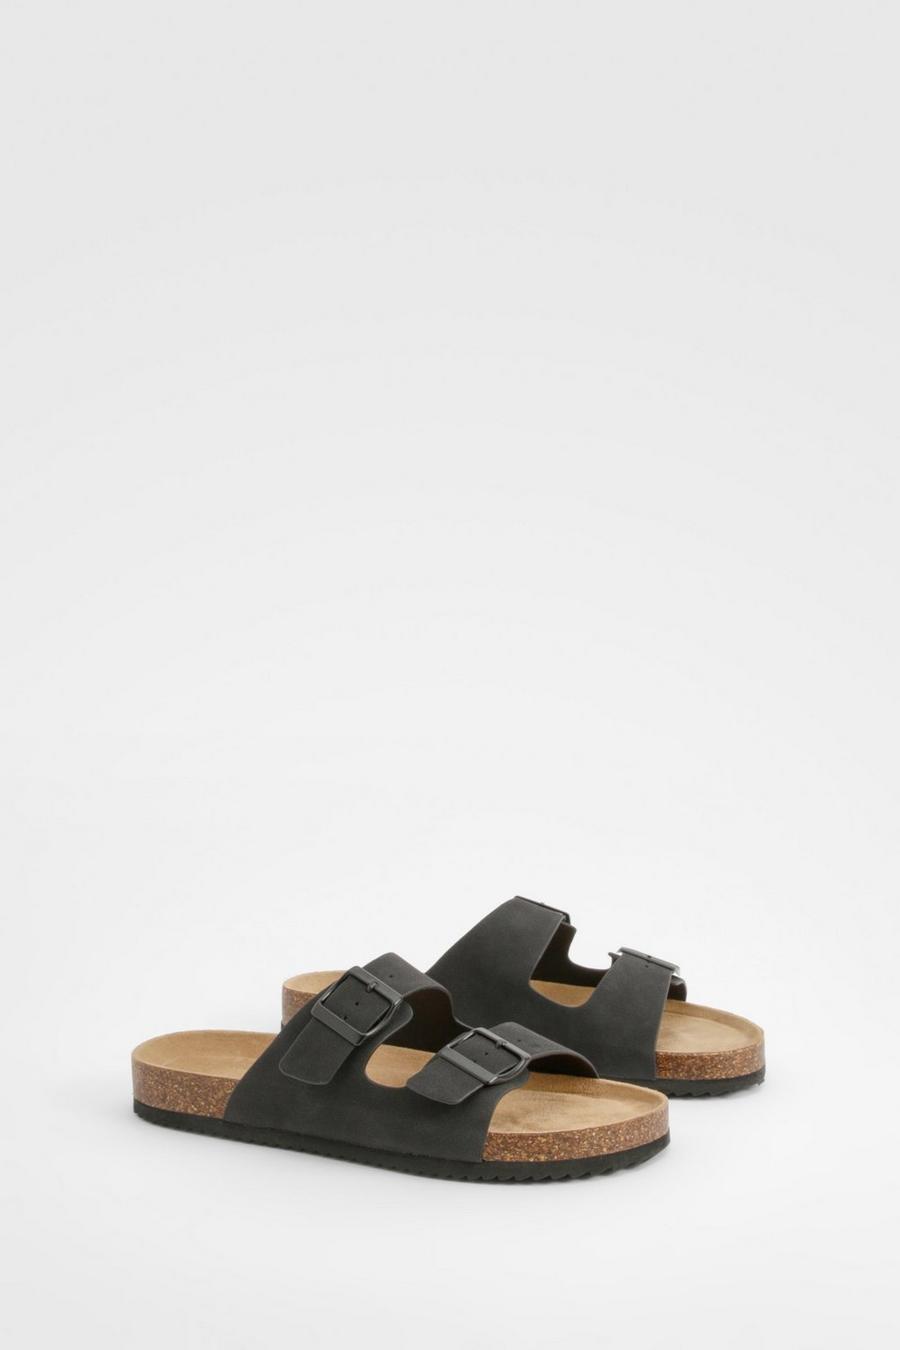 Black Double Strap Footbed Buckle Sliders   